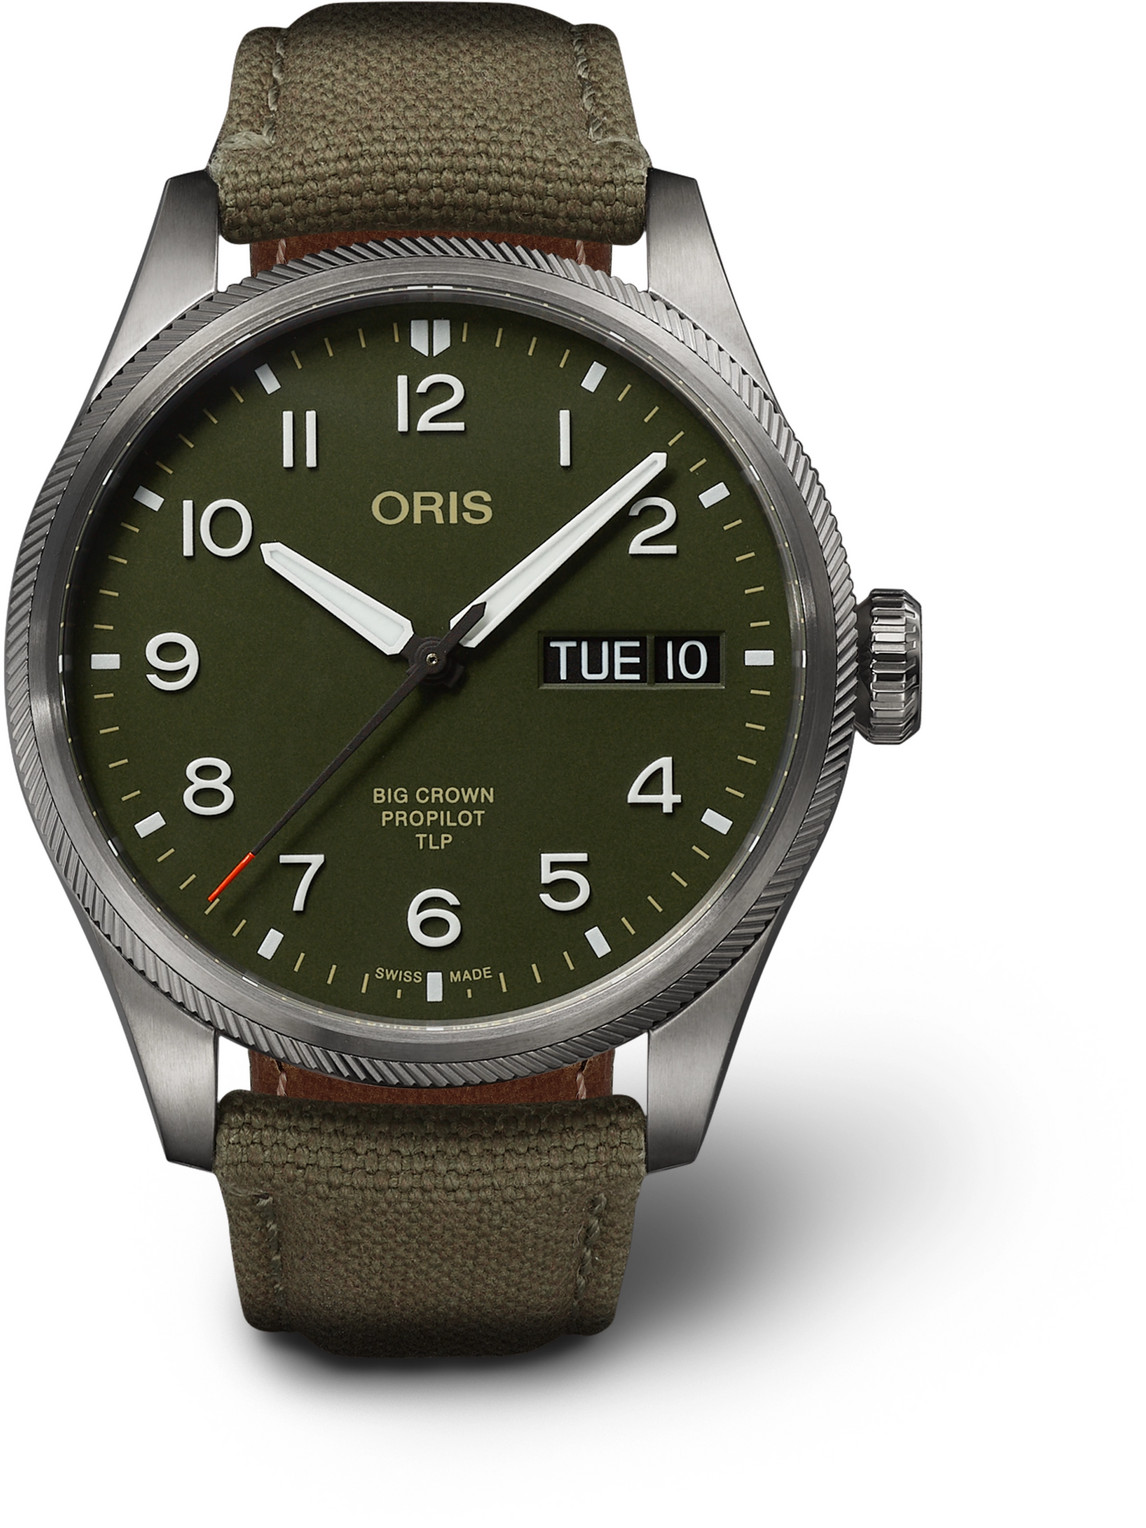 TLP Big Crown ProPilot Limited Edition Automatic 44mm Stainless Steel and Canvas Watch, Ref. No. 01 752 7760 4287-Set